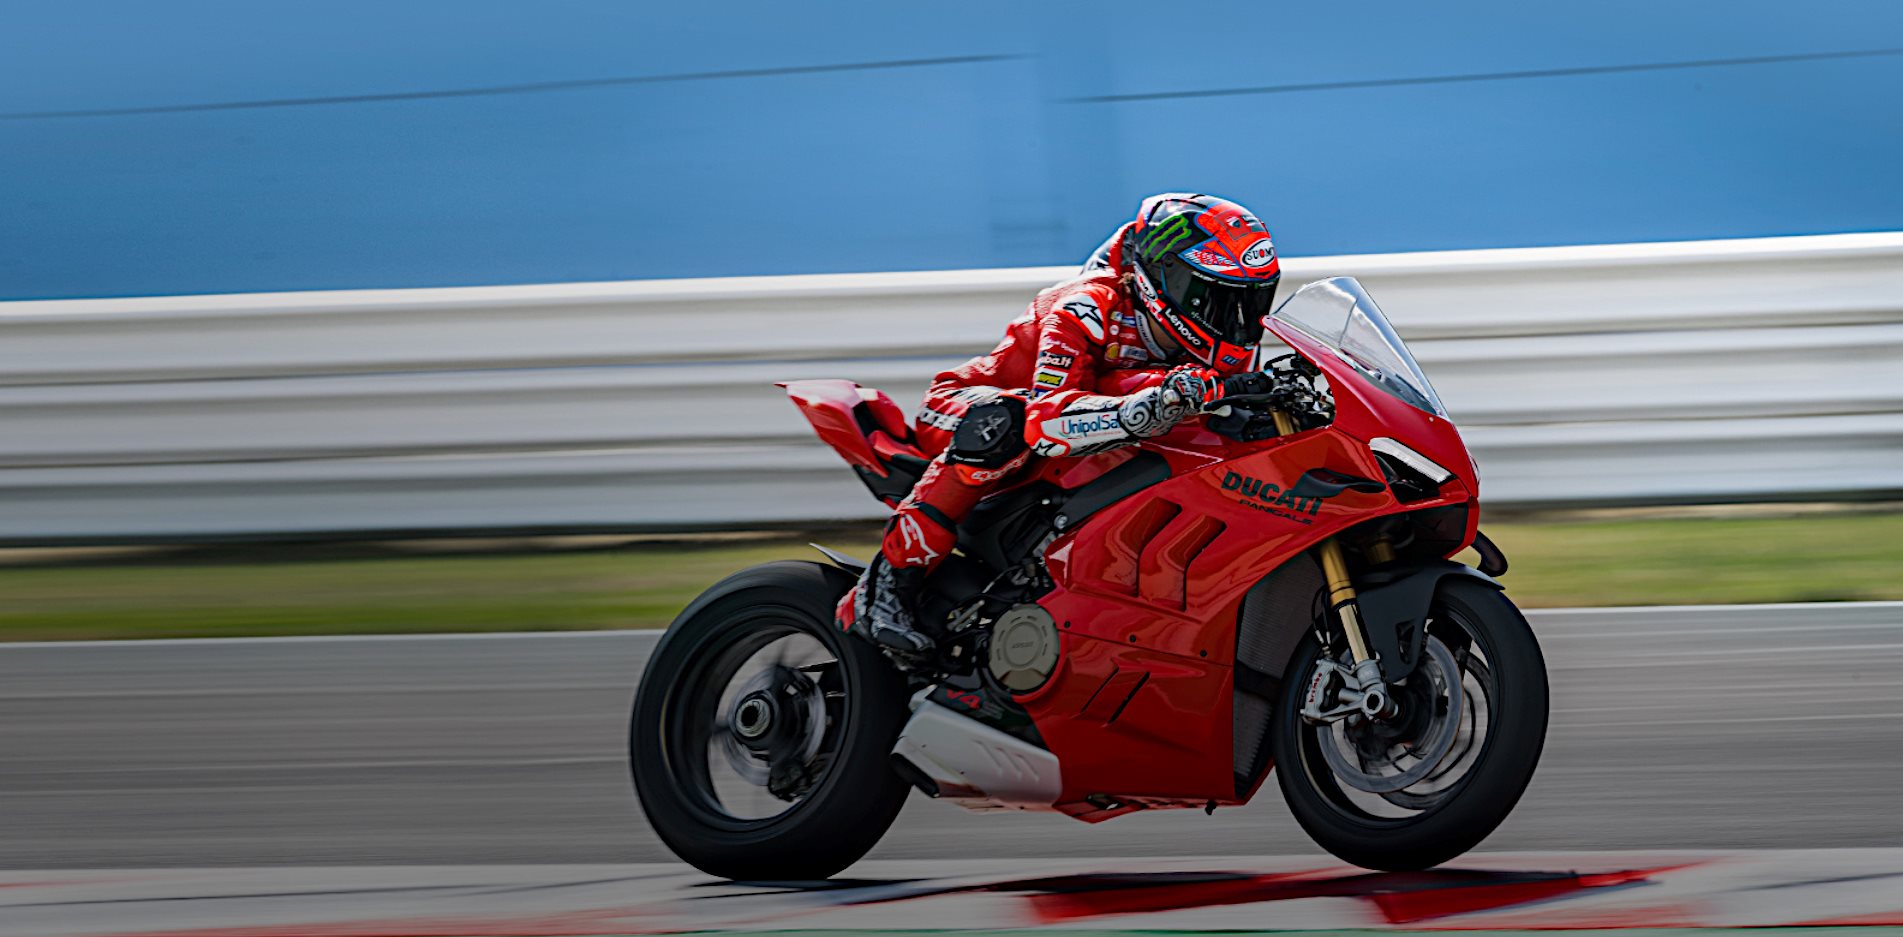 The Panigale V4 2022 represents the last step in the characteristic path of the Borgo Panigale sports bikes.